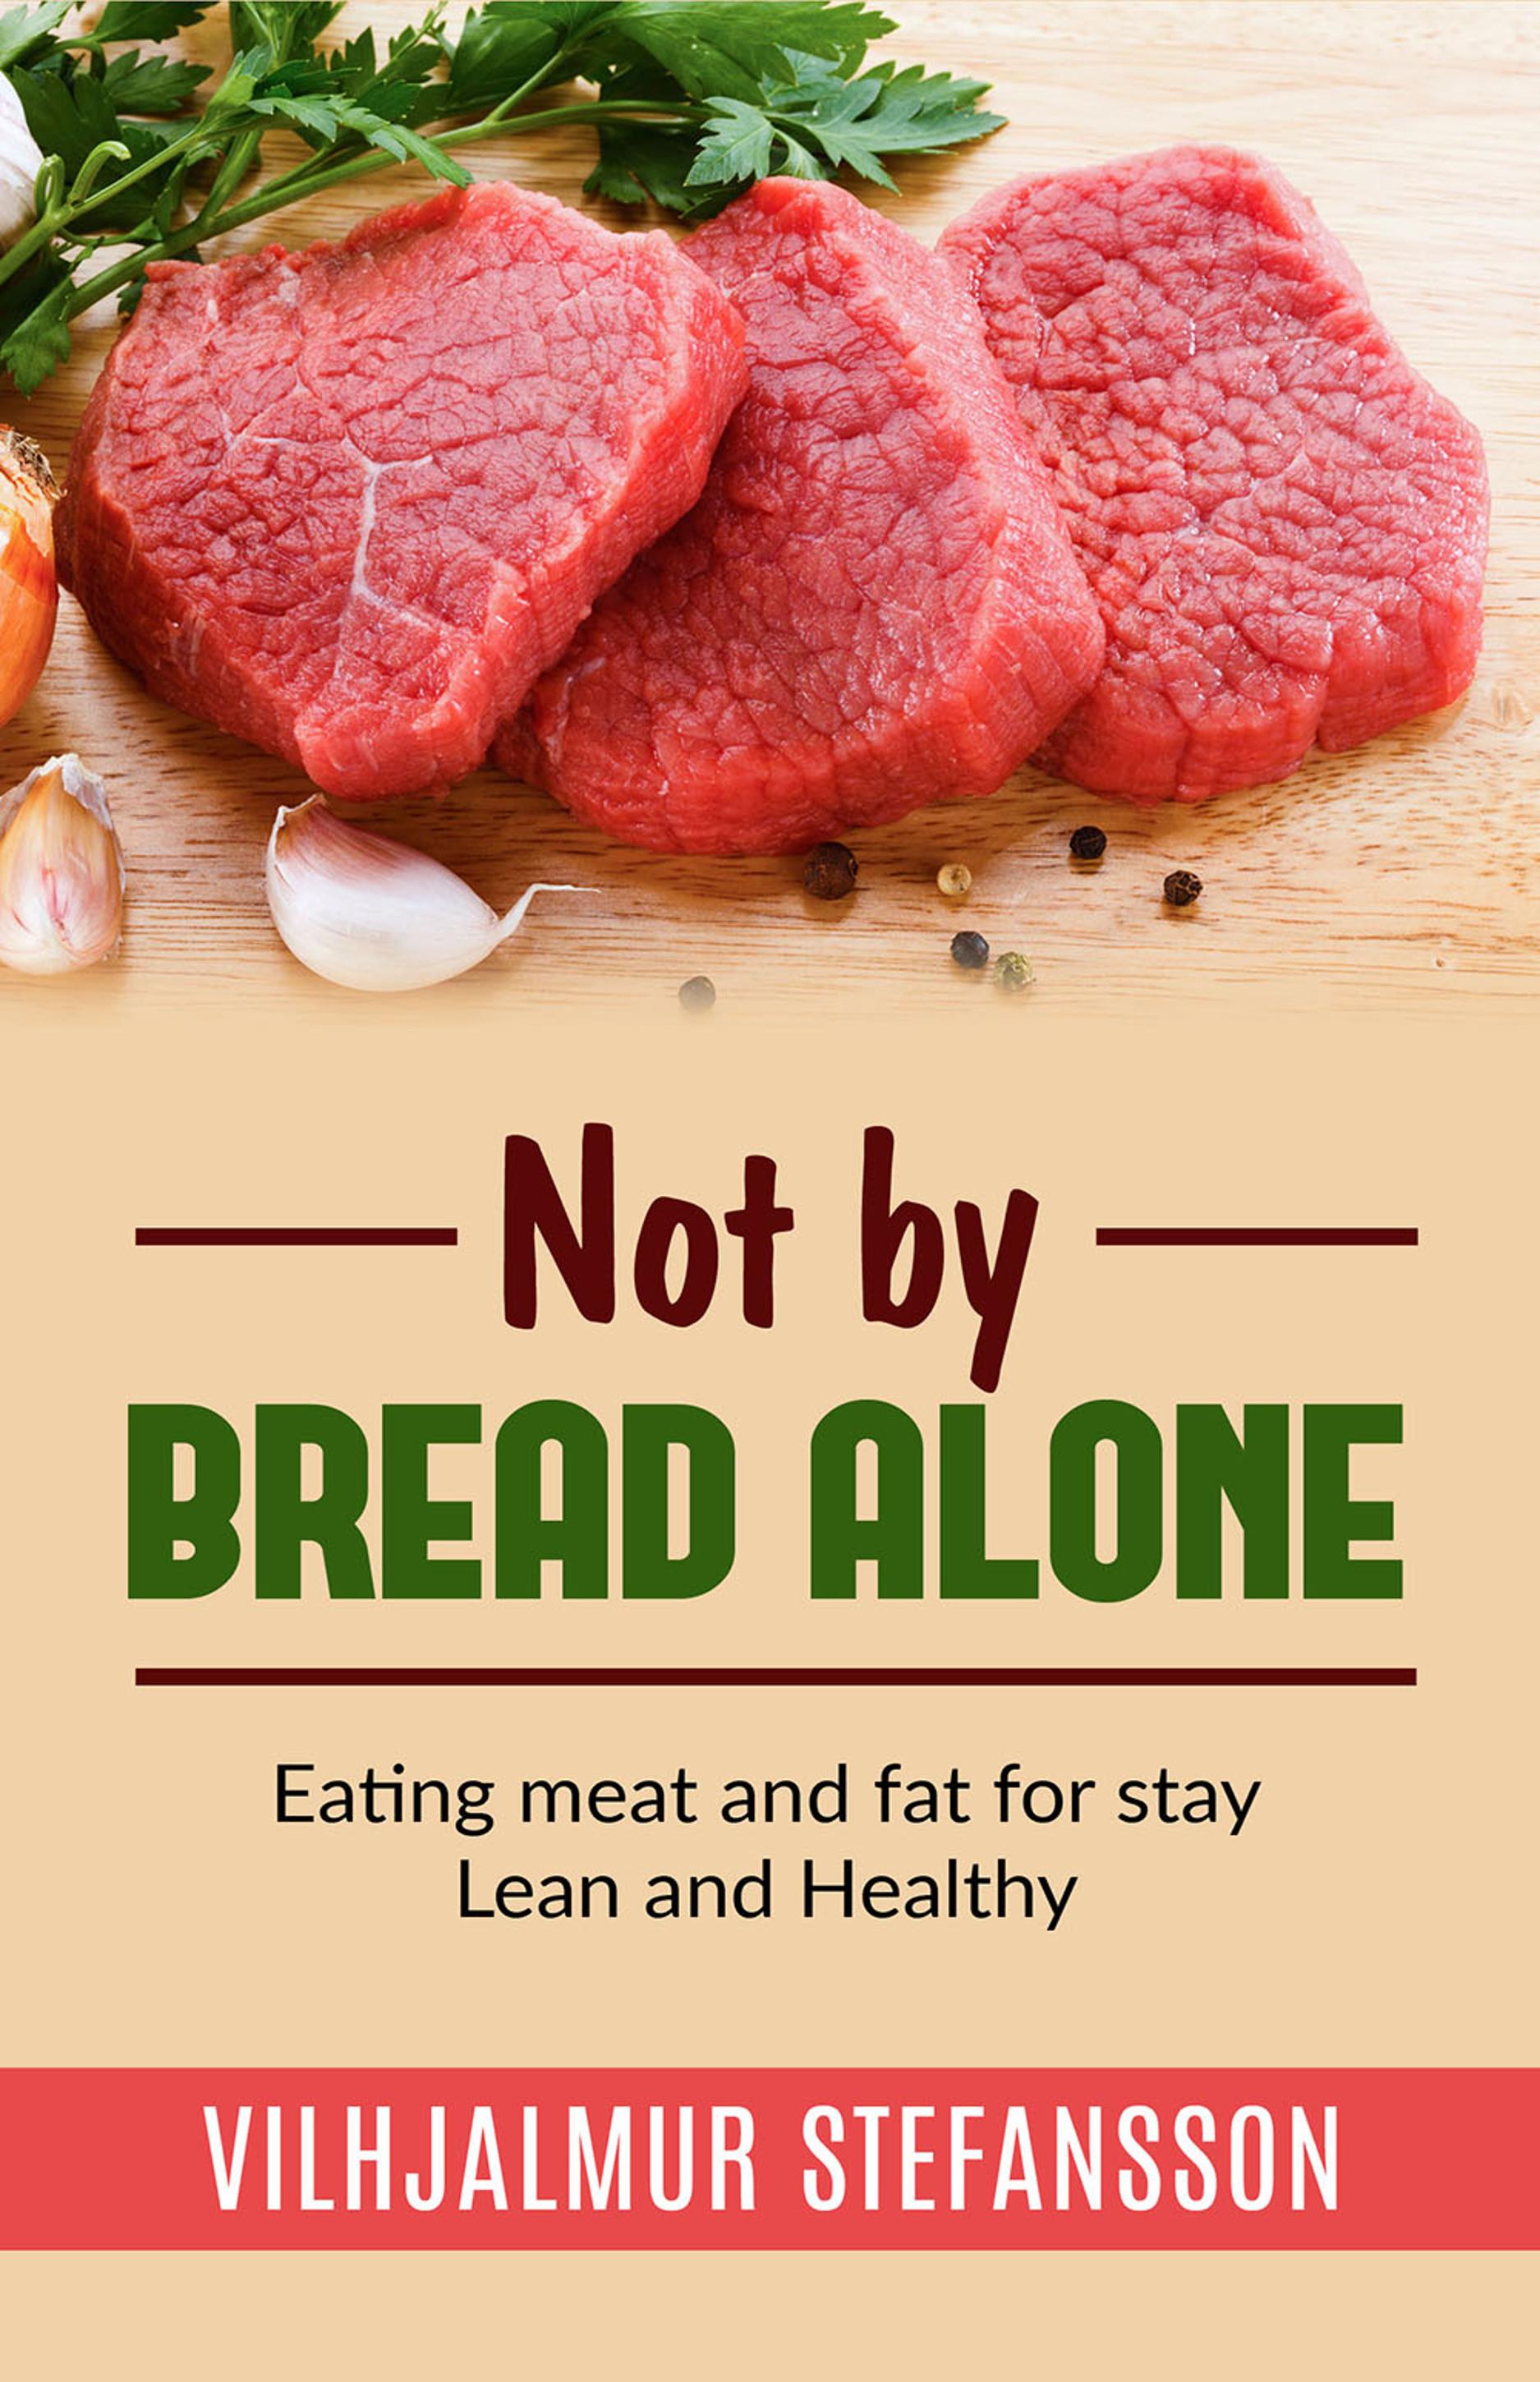 Not by bread alone - Eating meat and fat for stay Lean and Healthy